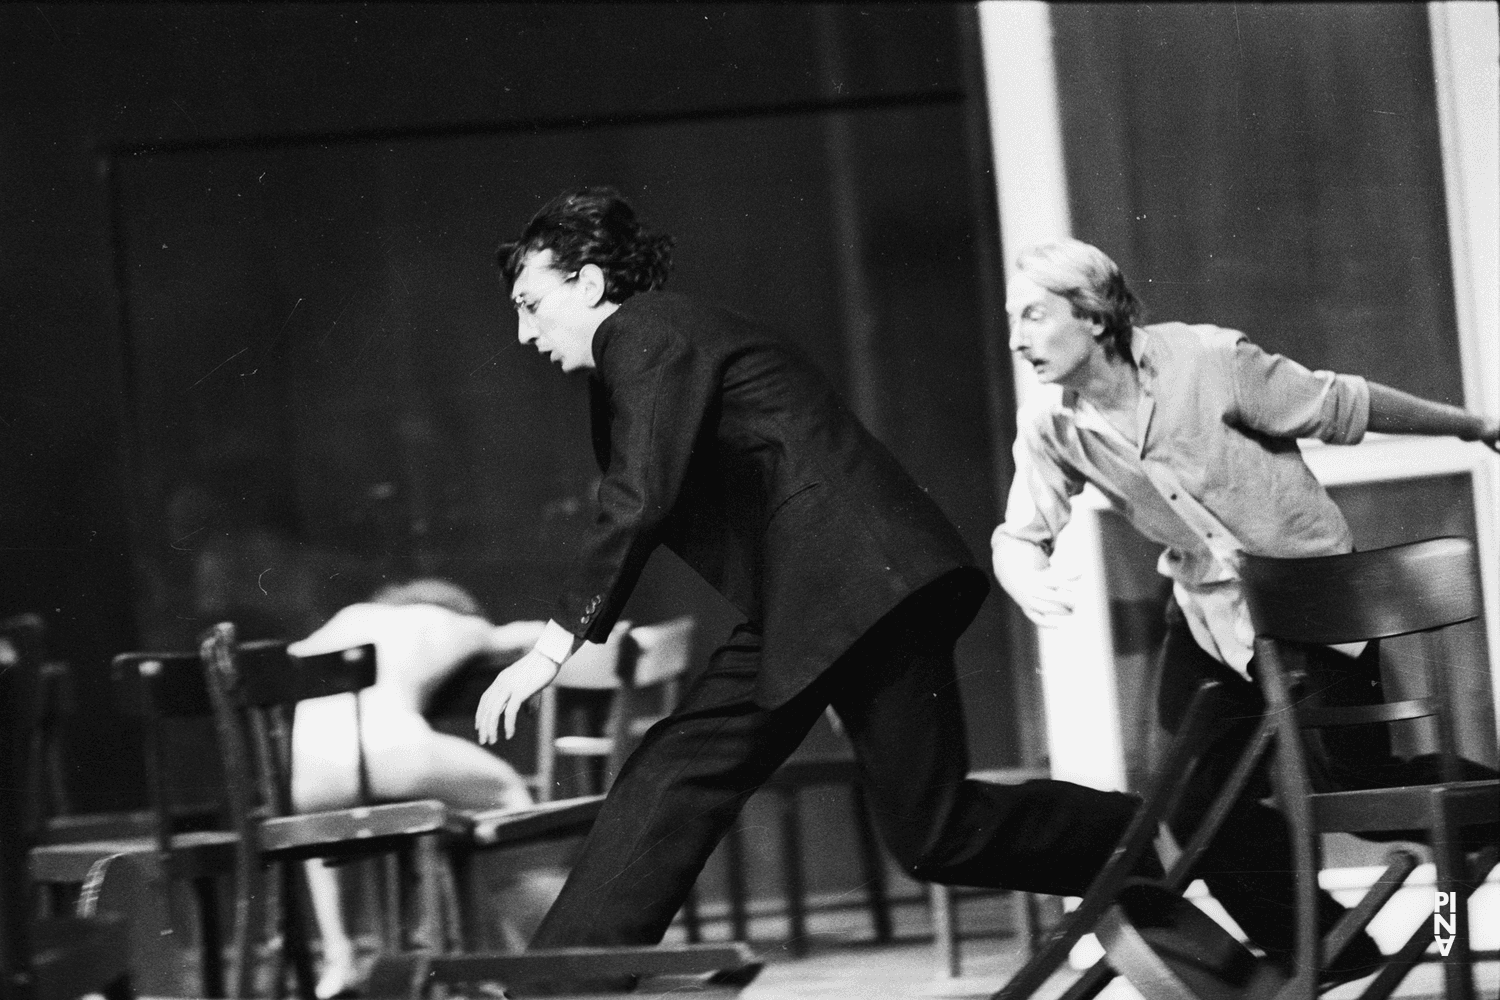 Jean Laurent Sasportes, Dominique Mercy and Malou Airaudo in “Café Müller” by Pina Bausch